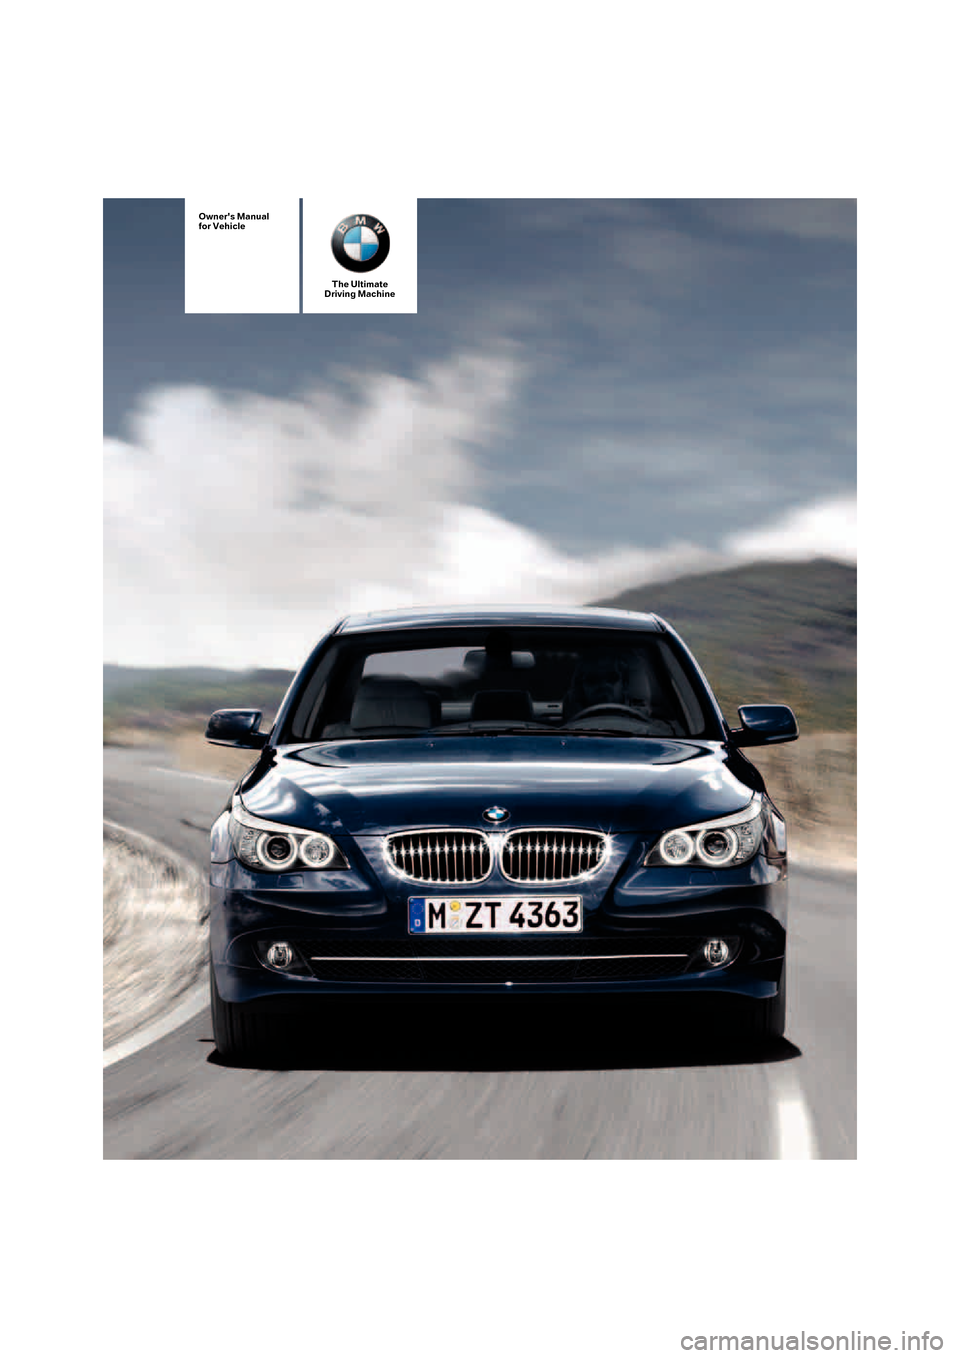 BMW 535XI SEDAN 2007 E60 Owners Manual The Ultimate
Driving Machine
Owners Manual
for Vehicle 